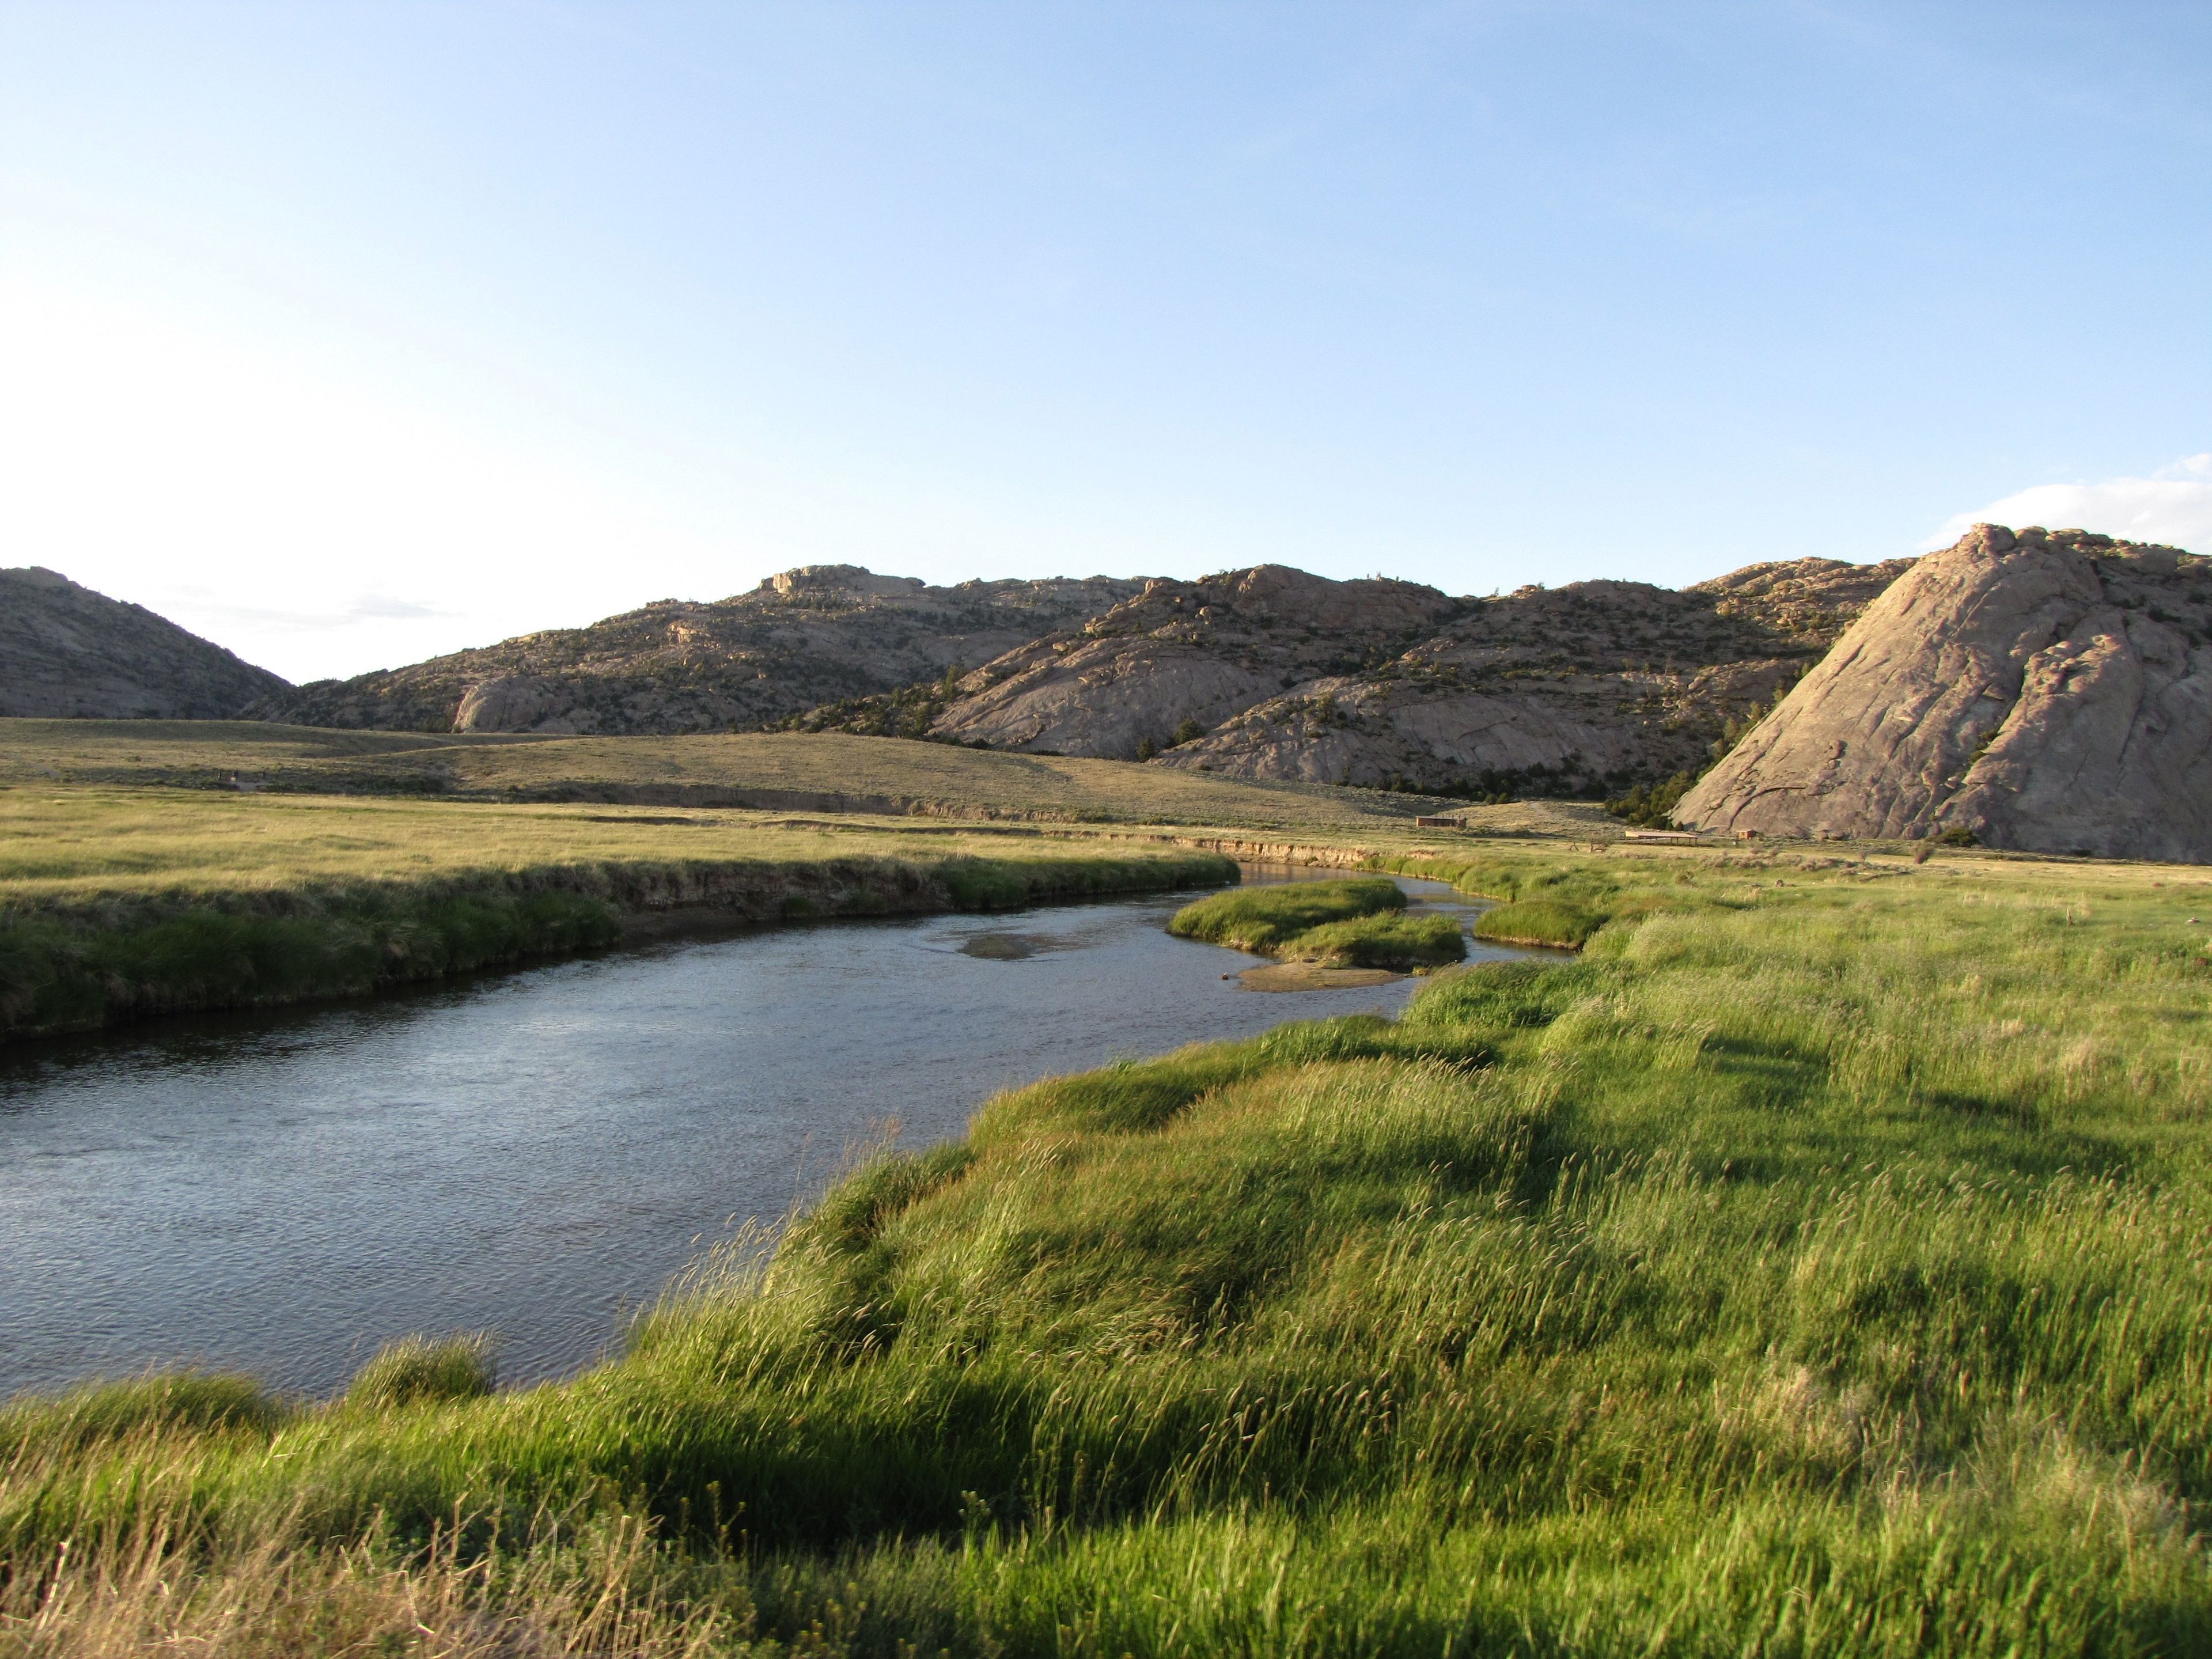 The Sweetwater River at Martin’s Cove in Wyoming.